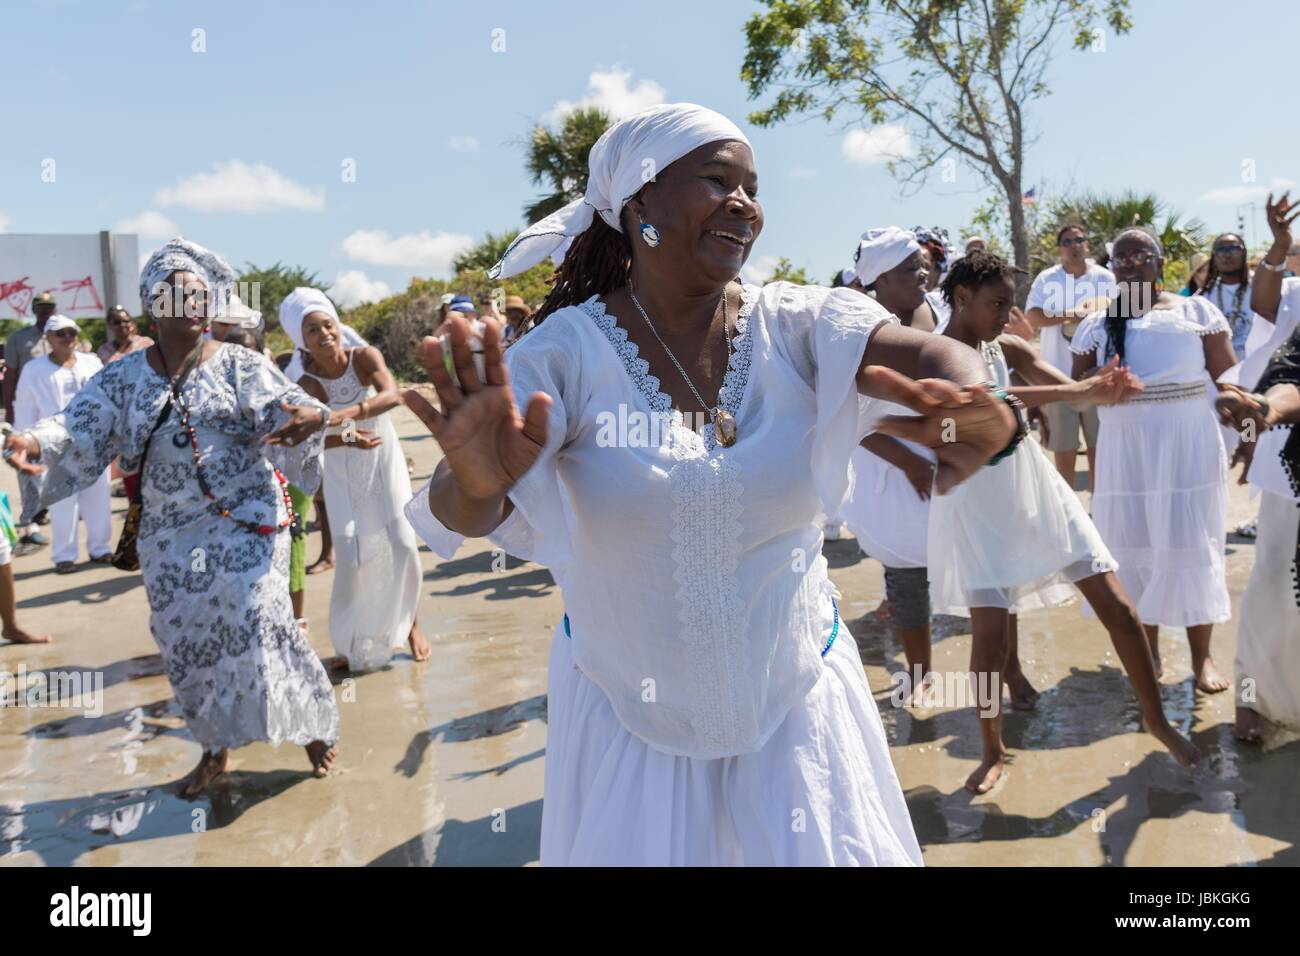 Descendants of enslaved Africans brought to Charleston in the Middle Passage dance to honor their relatives lost during a remembrance ceremony along the ocean front June 10, 2017 in Sullivan's Island, South Carolina. The Middle Passage refers to the triangular trade in which millions of Africans were shipped to the New World as part of the Atlantic slave trade. An estimated 15% of the Africans died at sea and considerably more in the process of capturing and transporting. The total number of African deaths directly attributable to the Middle Passage voyage is estimated at up to two million Afr Stock Photo